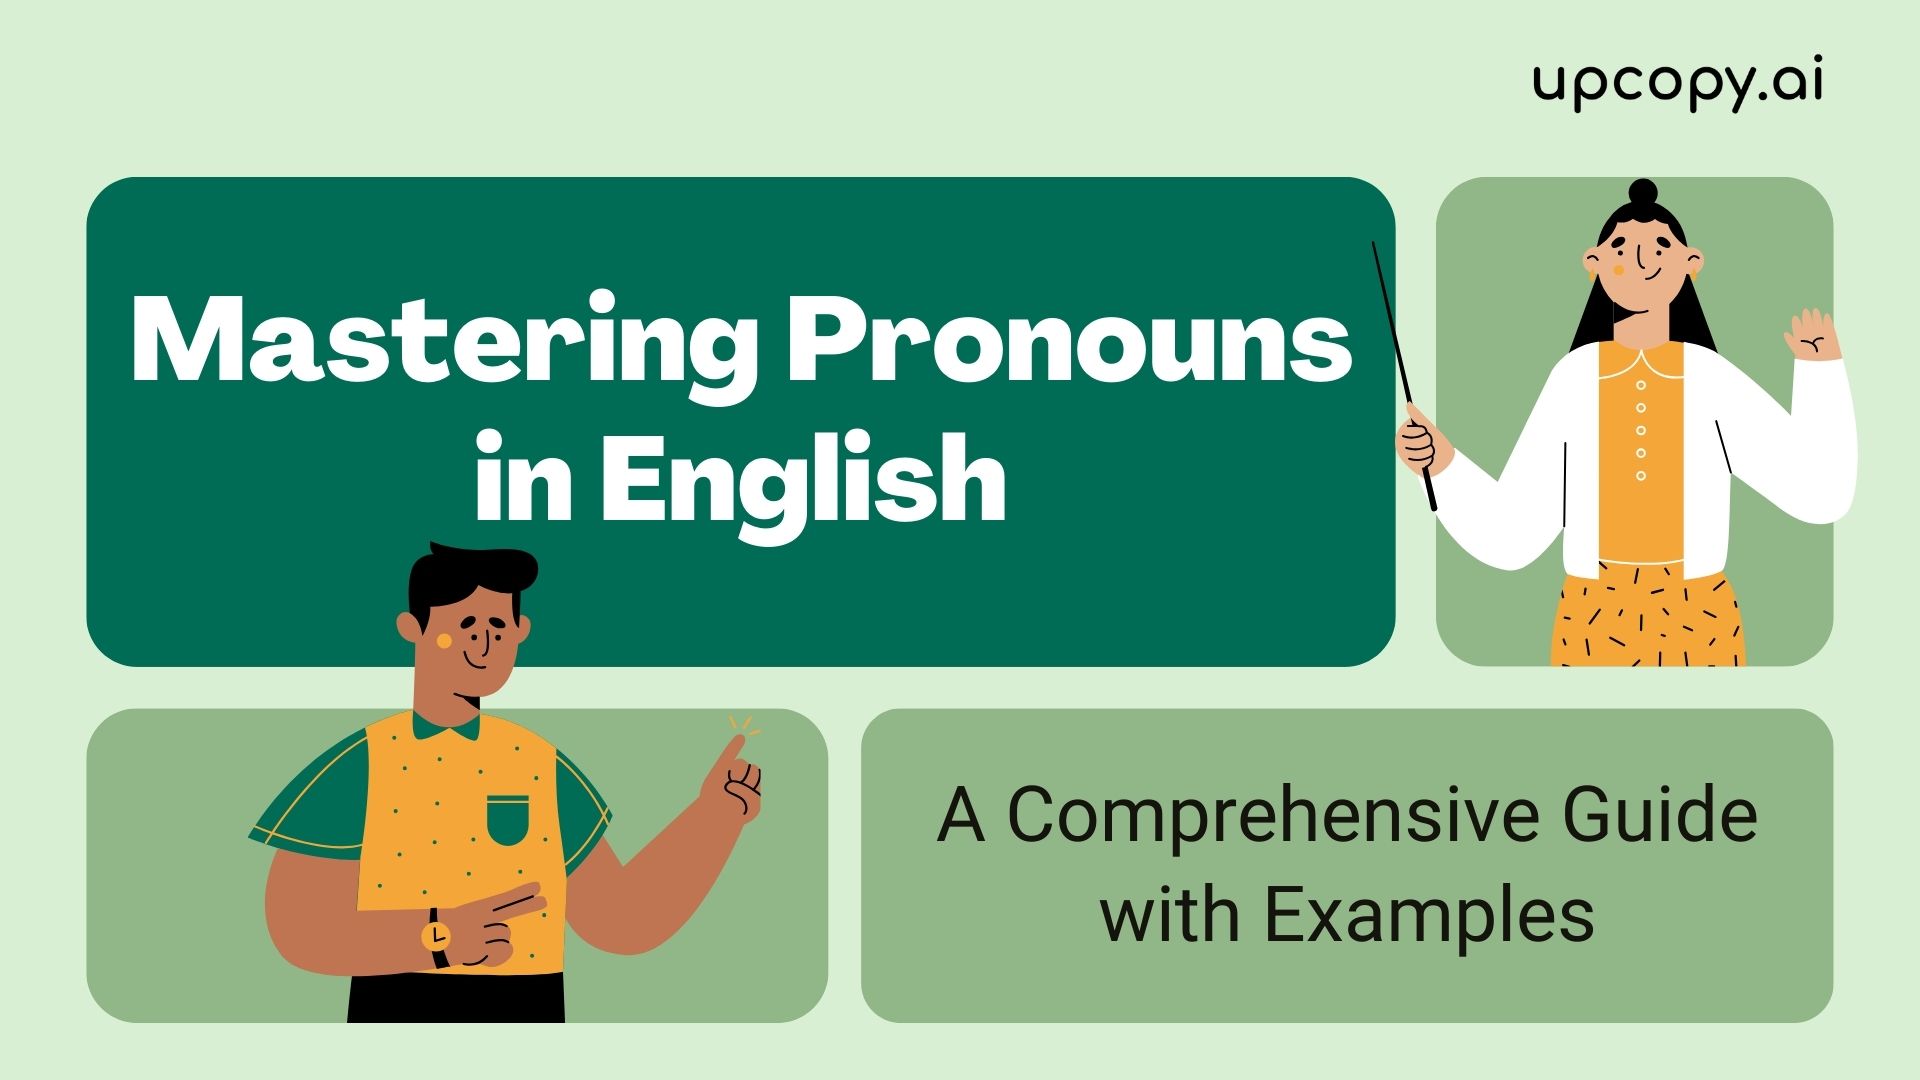 Mastering Pronouns in English: A Comprehensive Guide - upcopy.ai